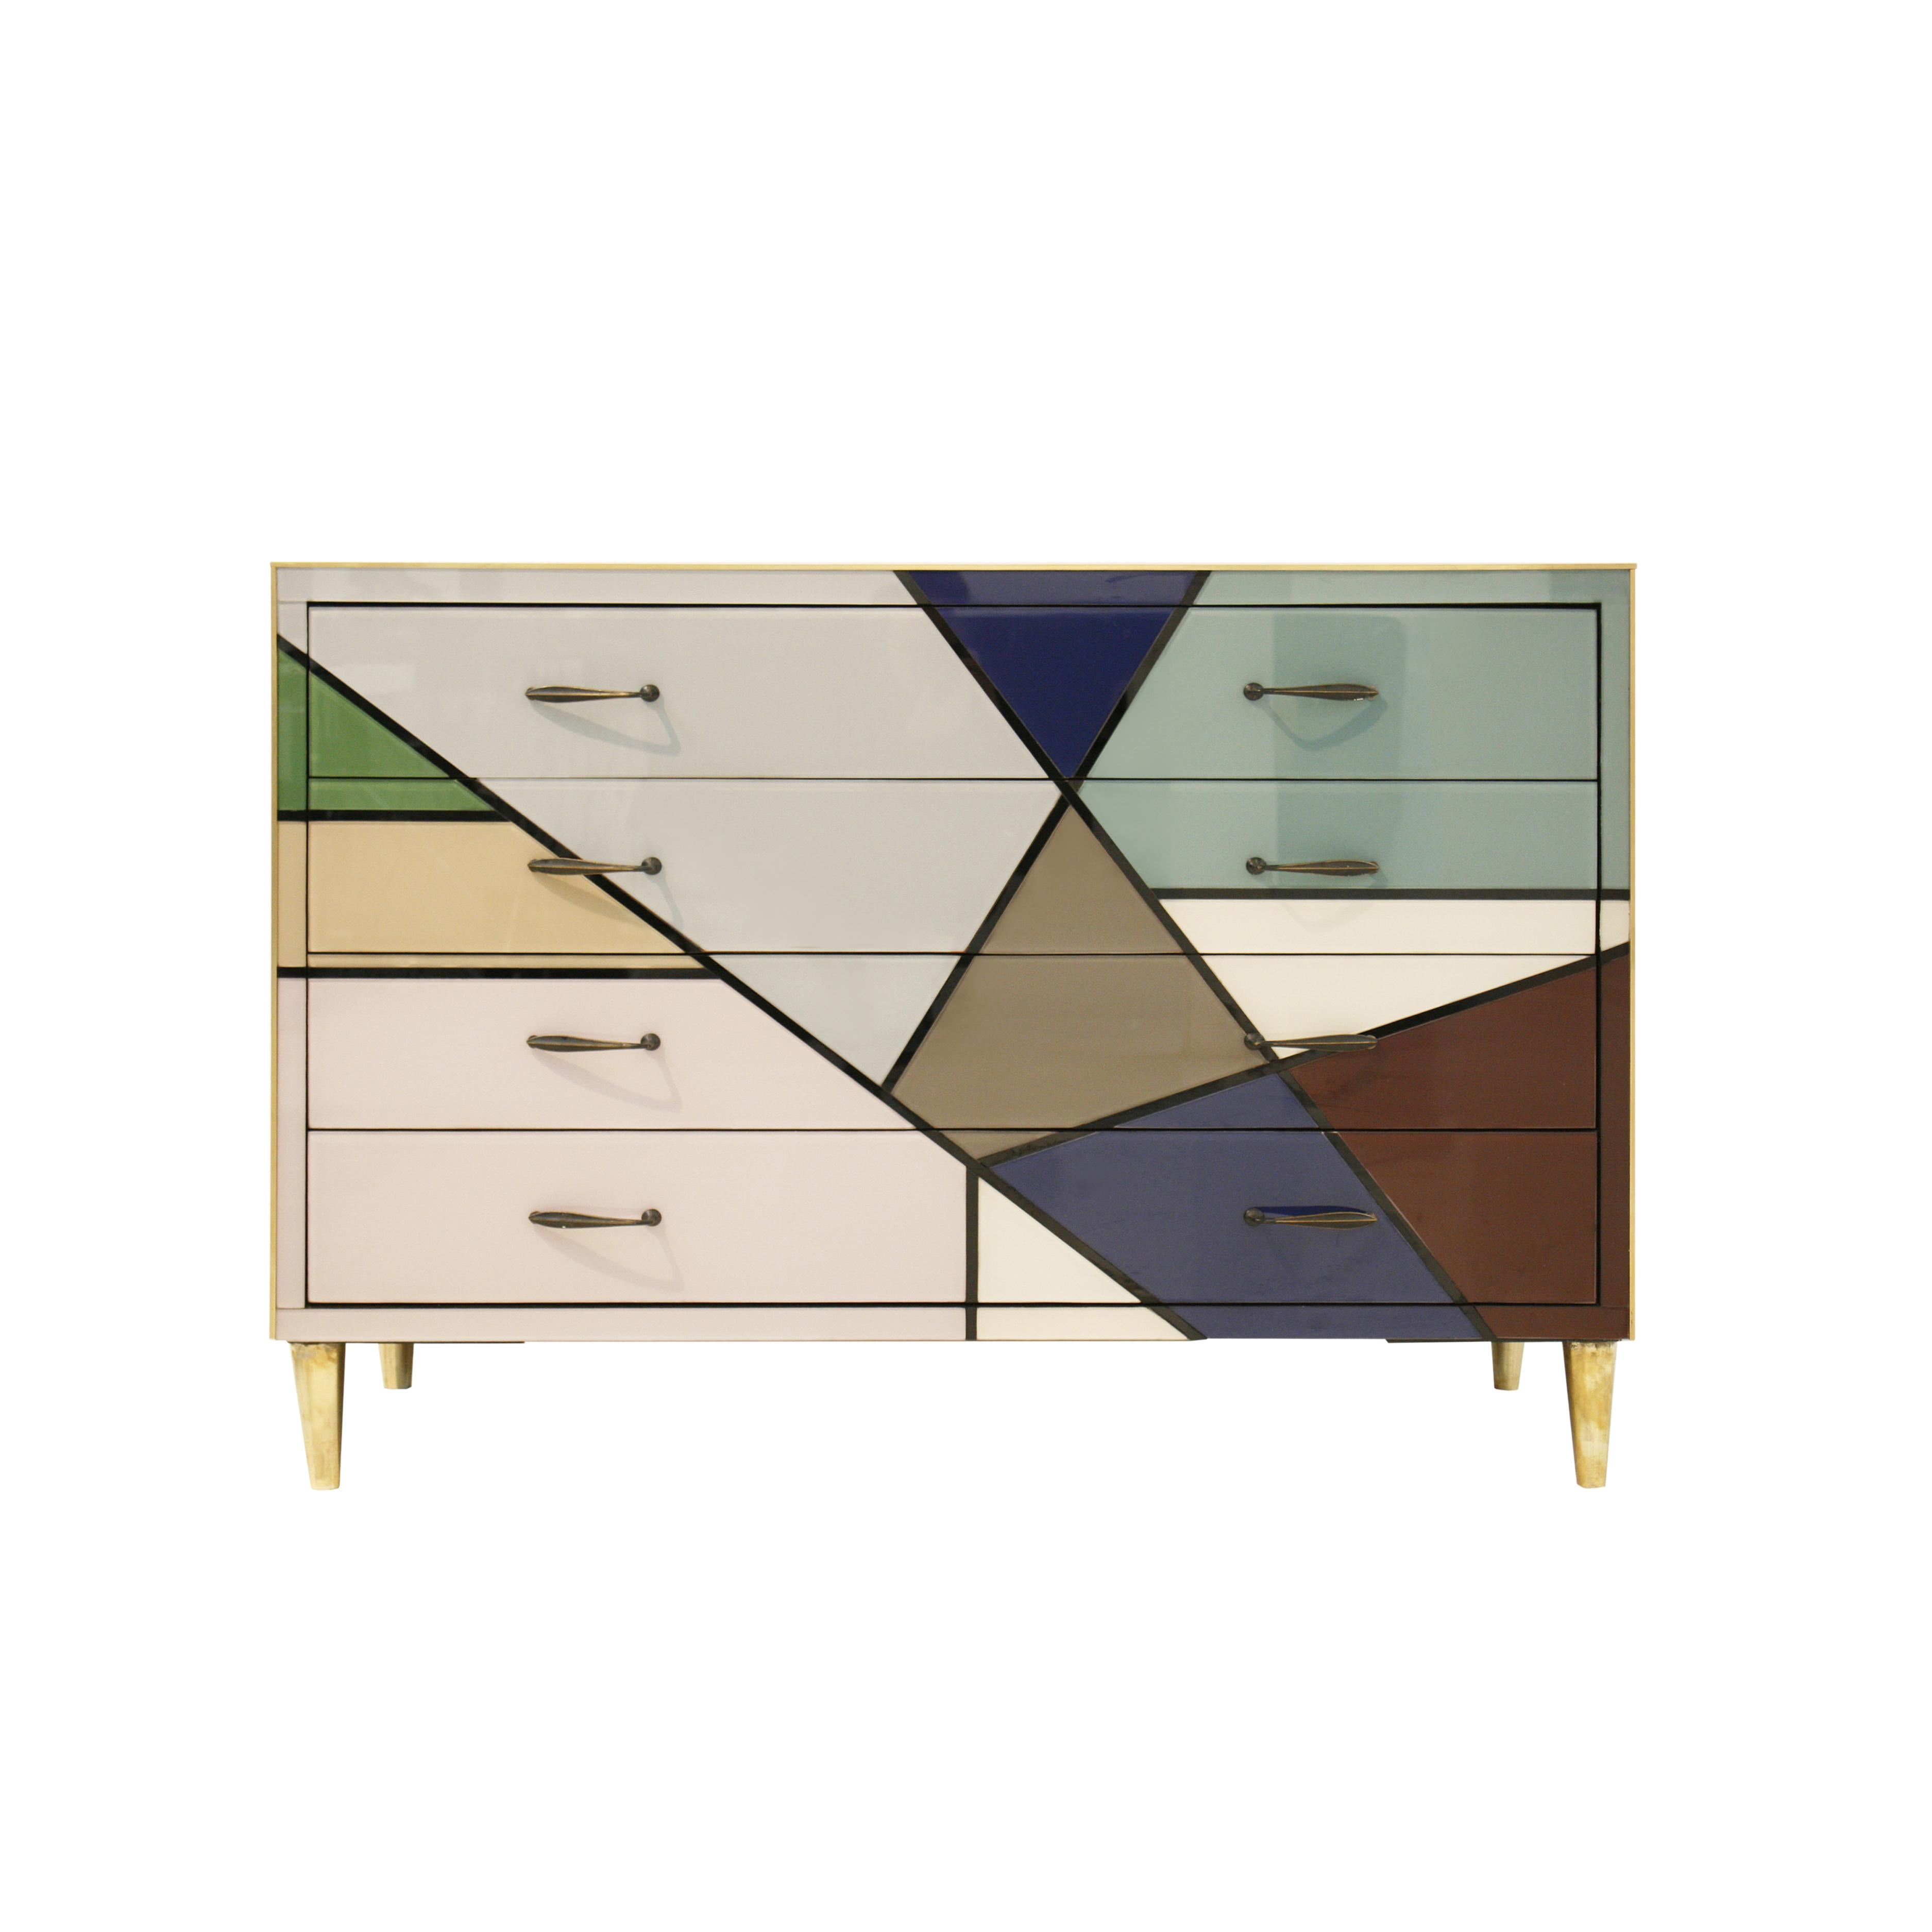 Beautiful chest of drawers designed by L.A. Studio. Made of solid wood structure from the 1950s and covered in Murano soft colored glass. Composed of four drawers with brass handles and legs. A stunning statement for a room.

Our main target is